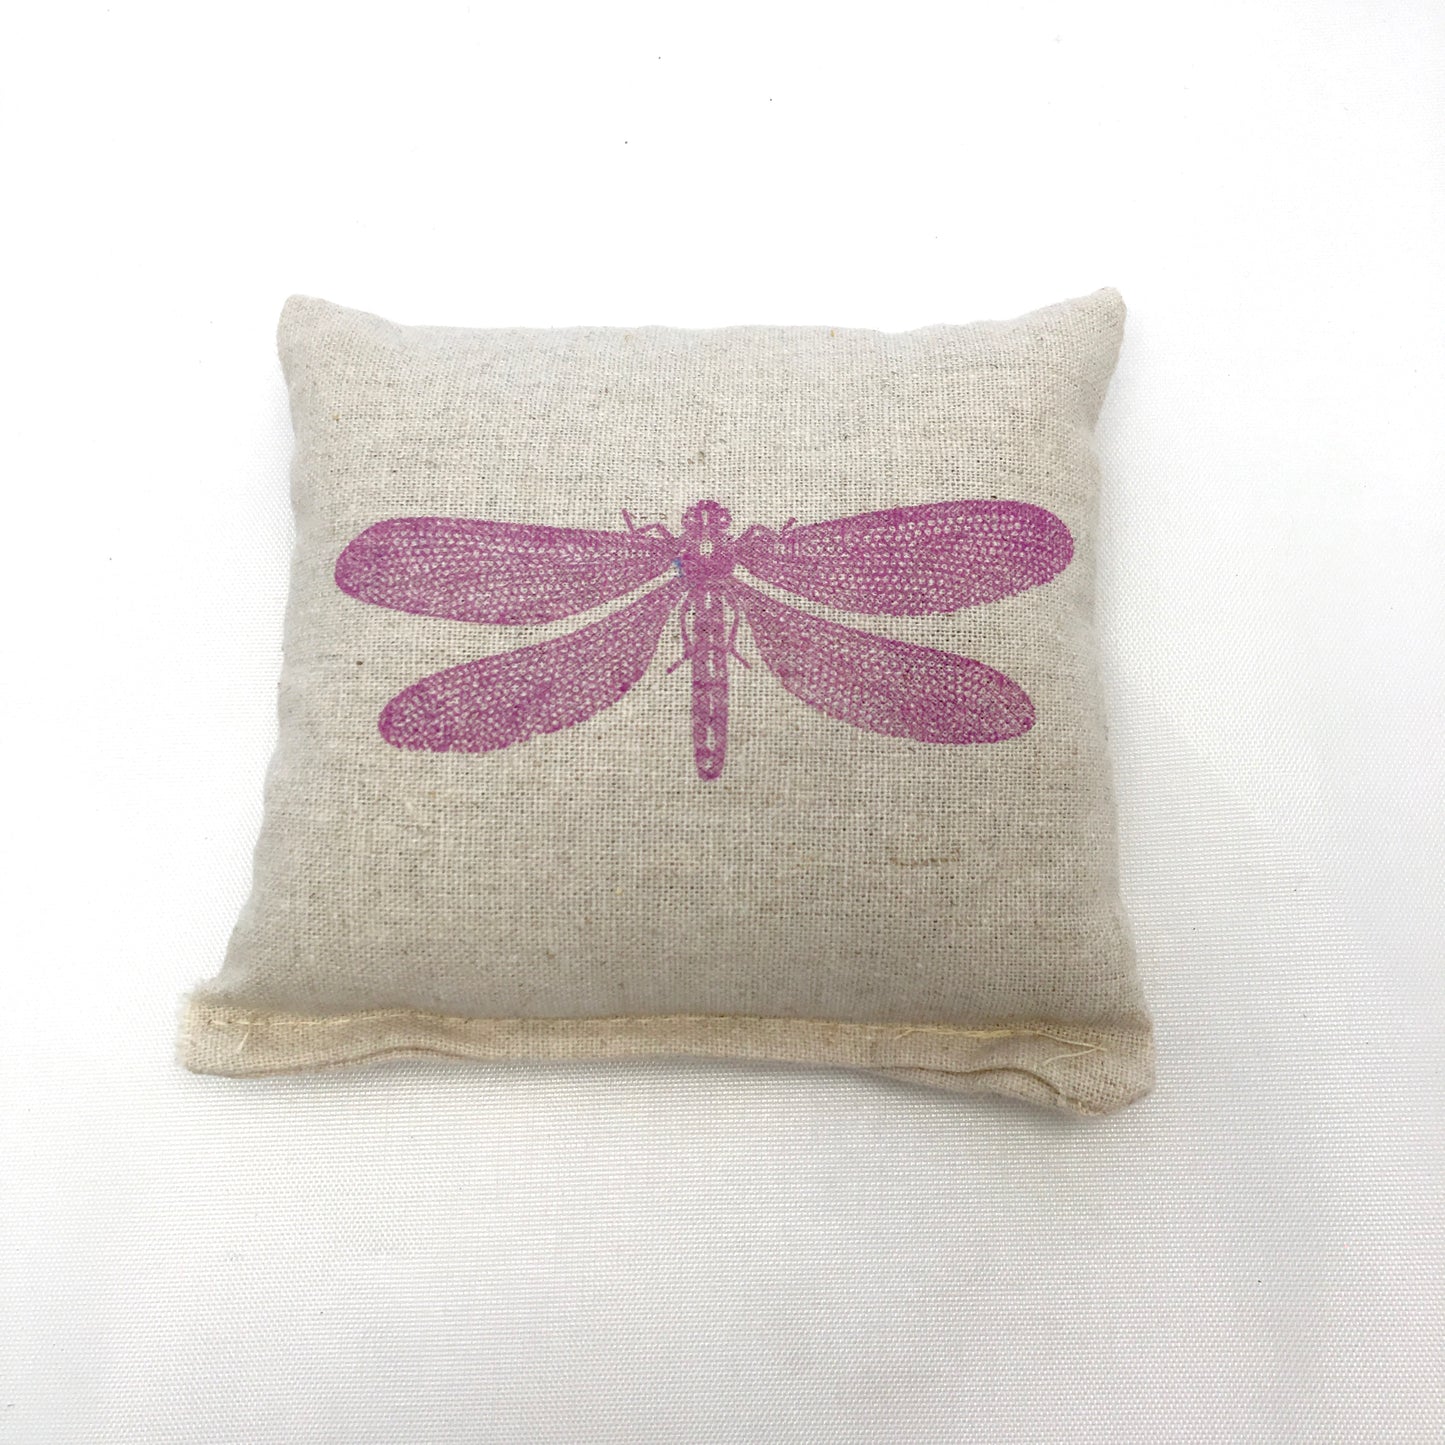 Dragonfly Design Sachet - Choice of Ink Color and Scent